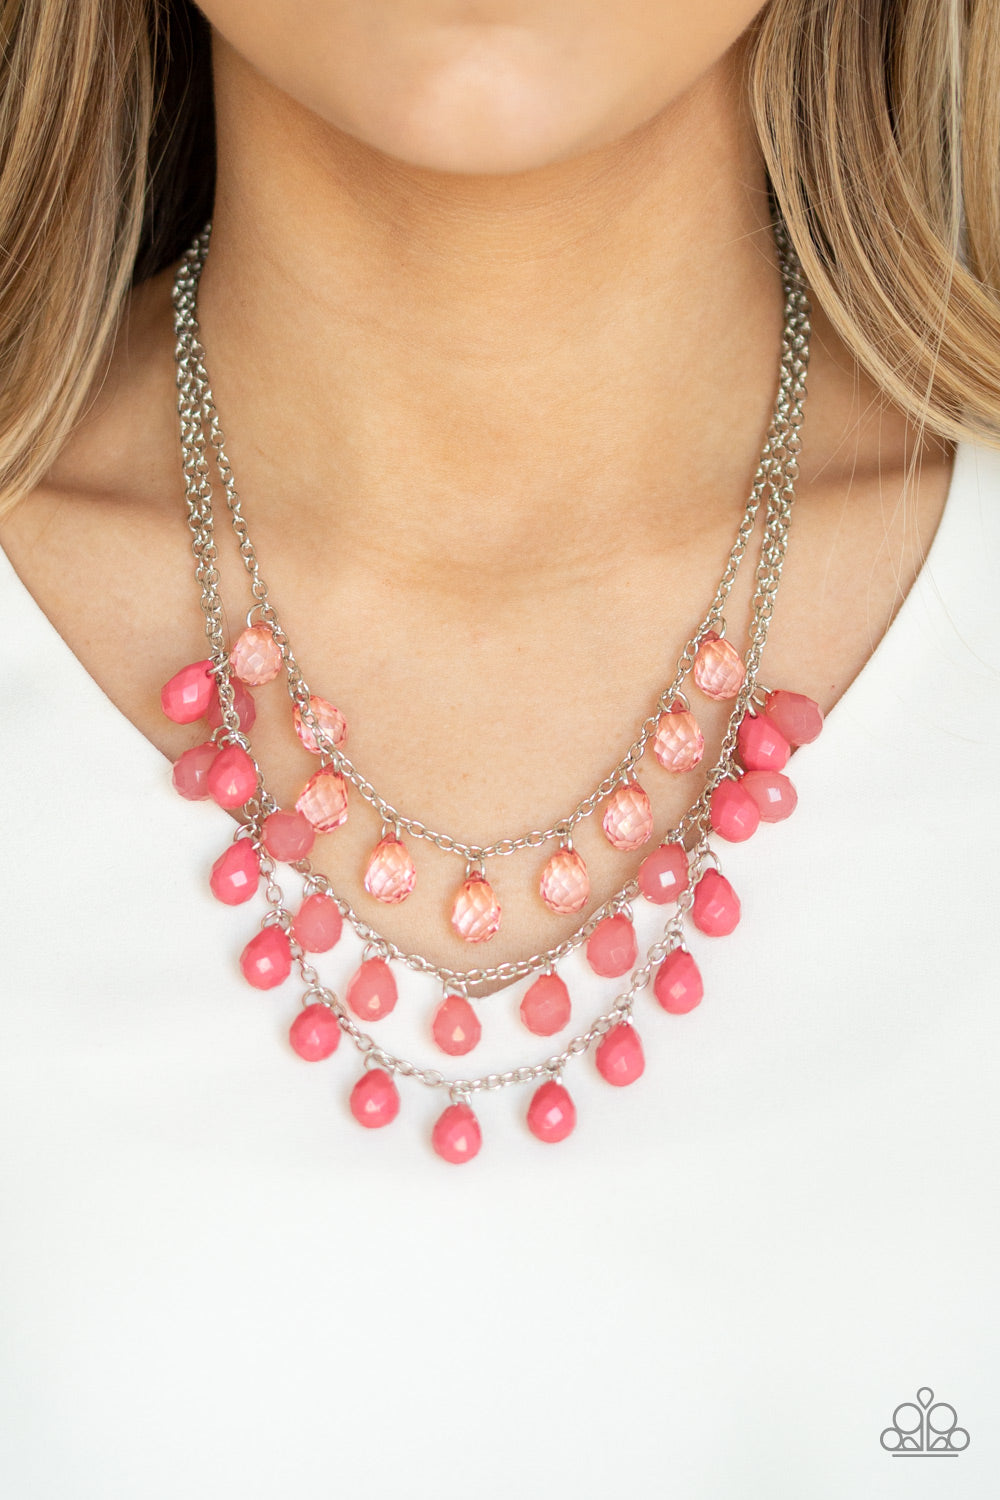 Melting Ice Caps Pink Necklace - Paparazzi Accessories